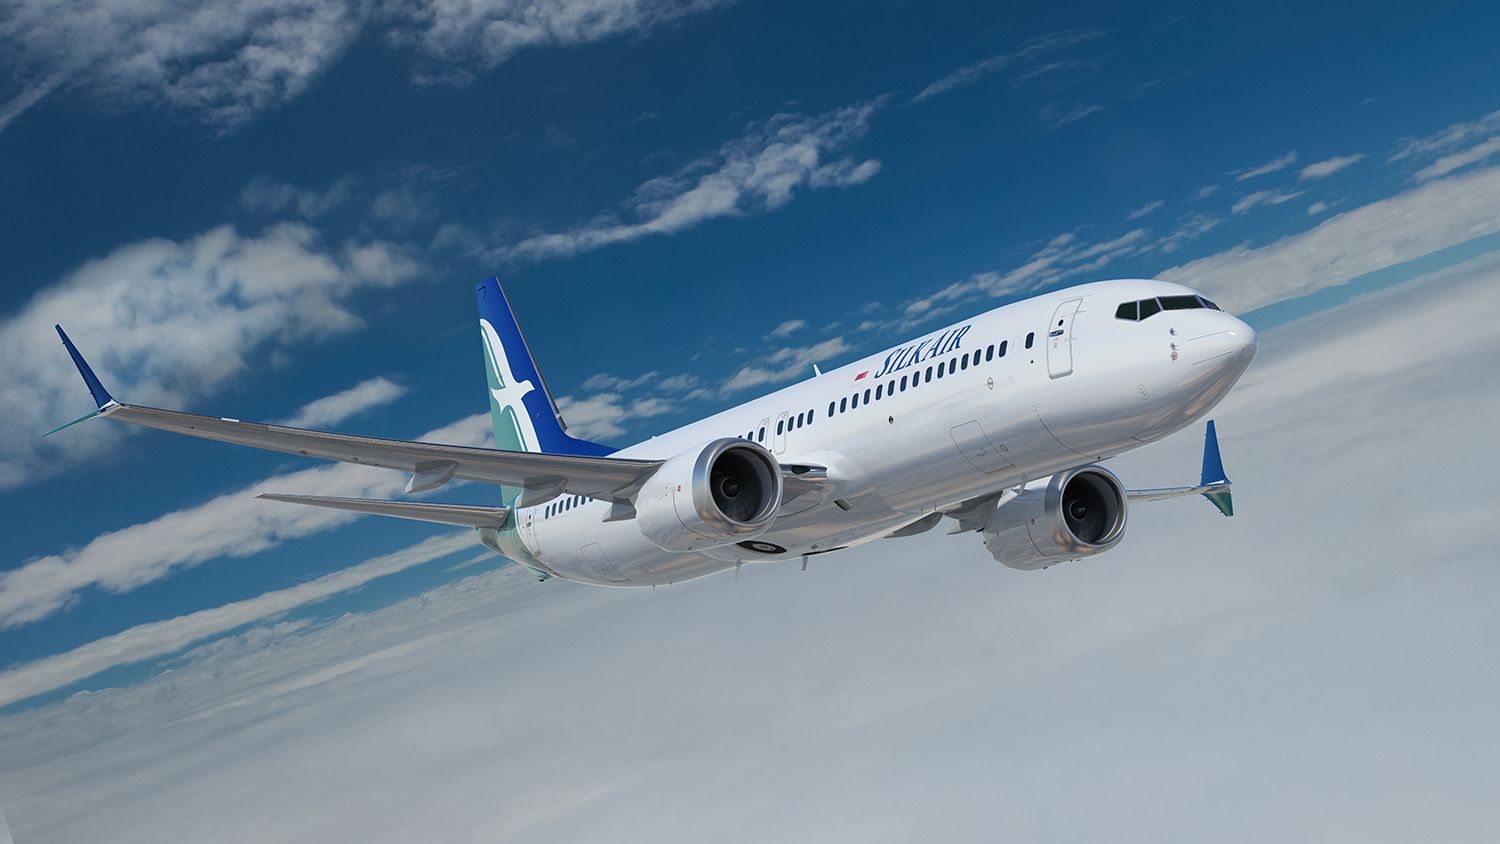 A signature feature of these next-gen Boeing 737s are the 'split scimitar' wingtips, which reduce drag and boost fuel efficiency.